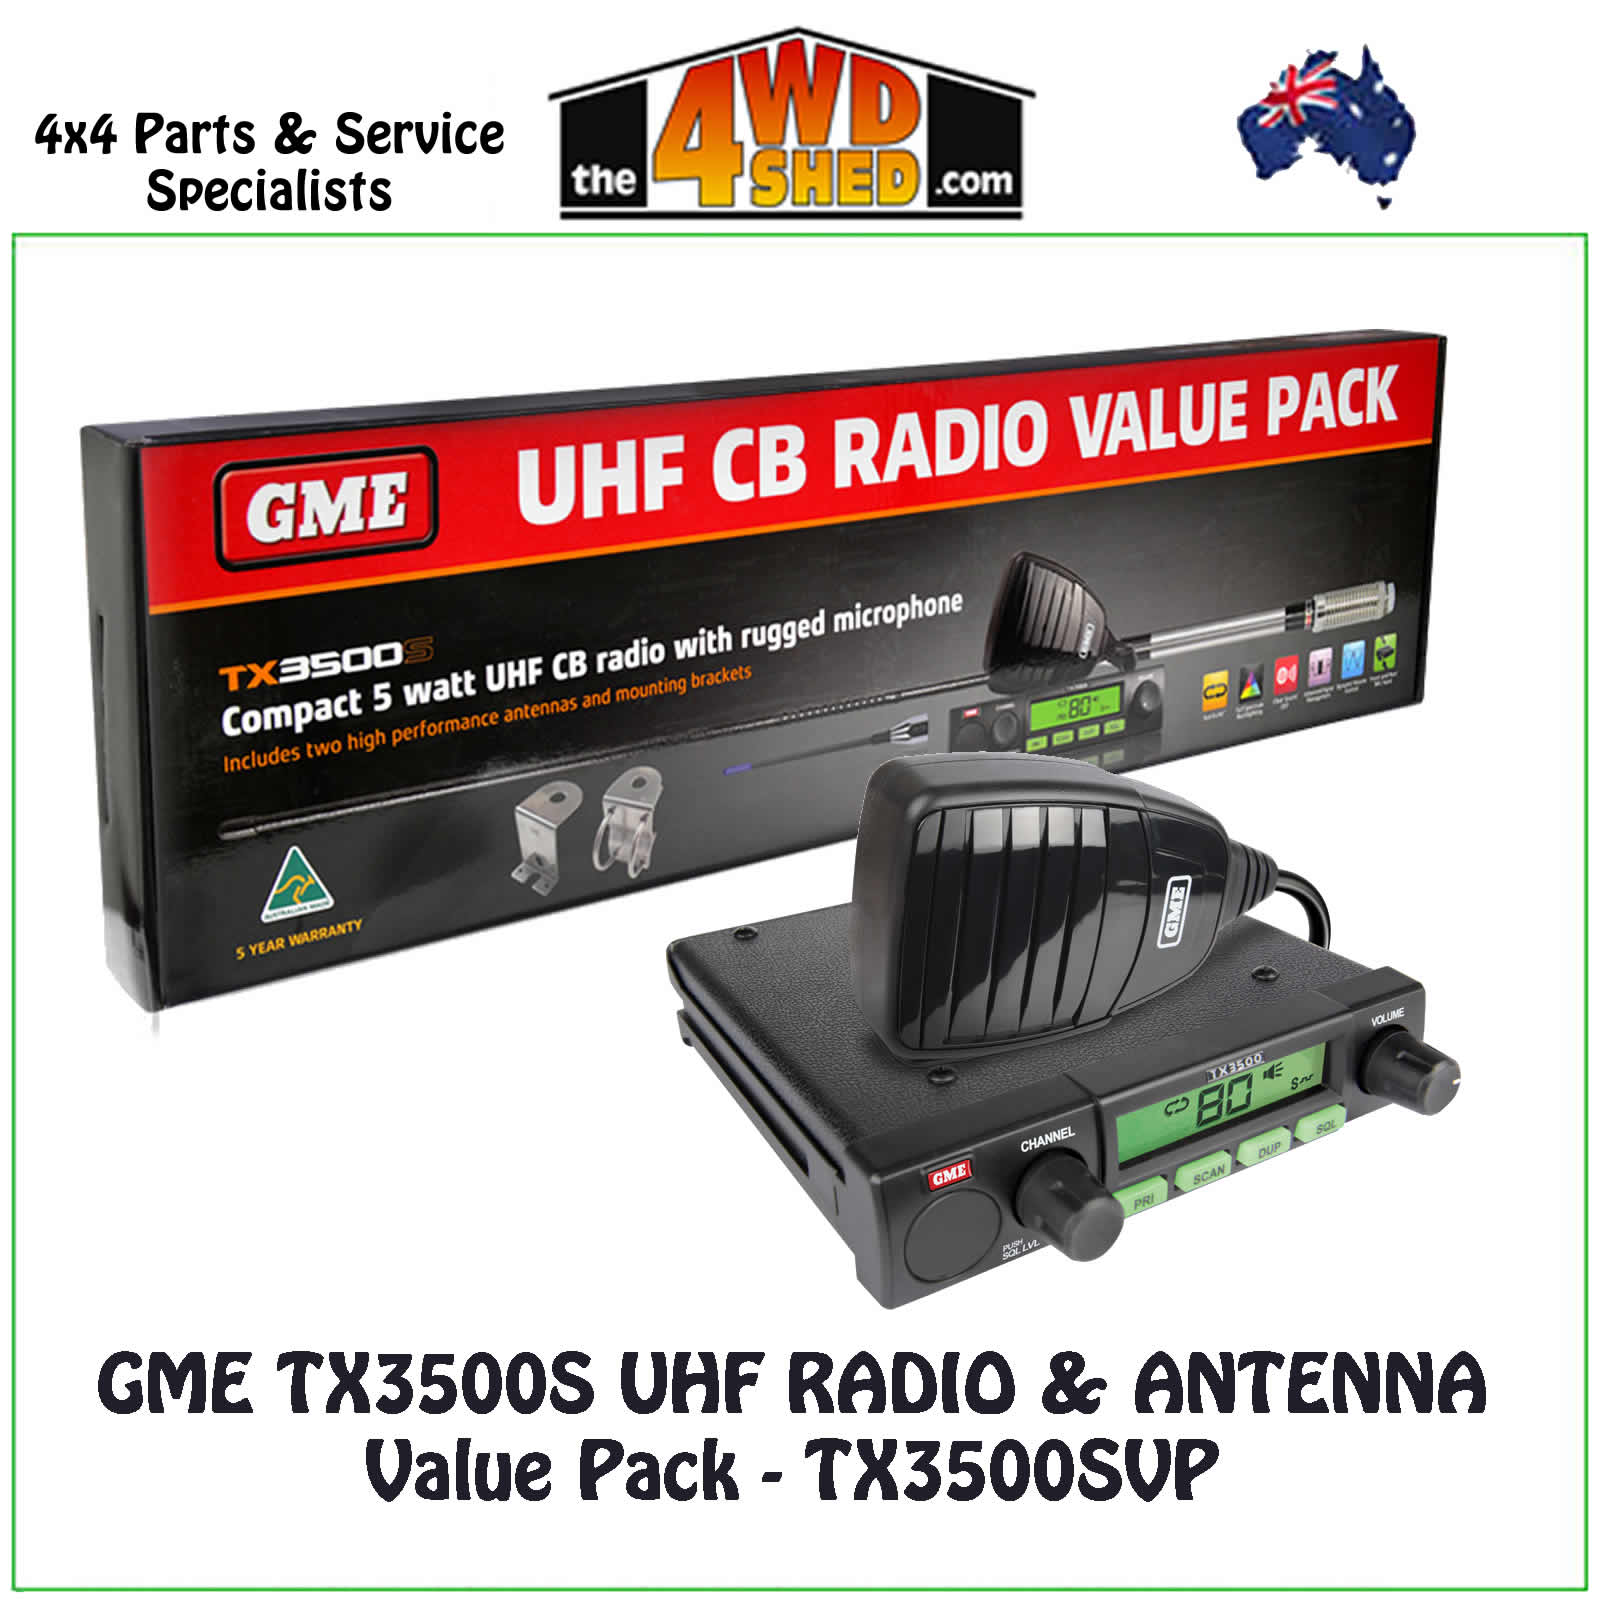 <span style="font-size: 16px;" class="">GME TX3500S UHF RADIO &amp; ANTENNA PACK</span>